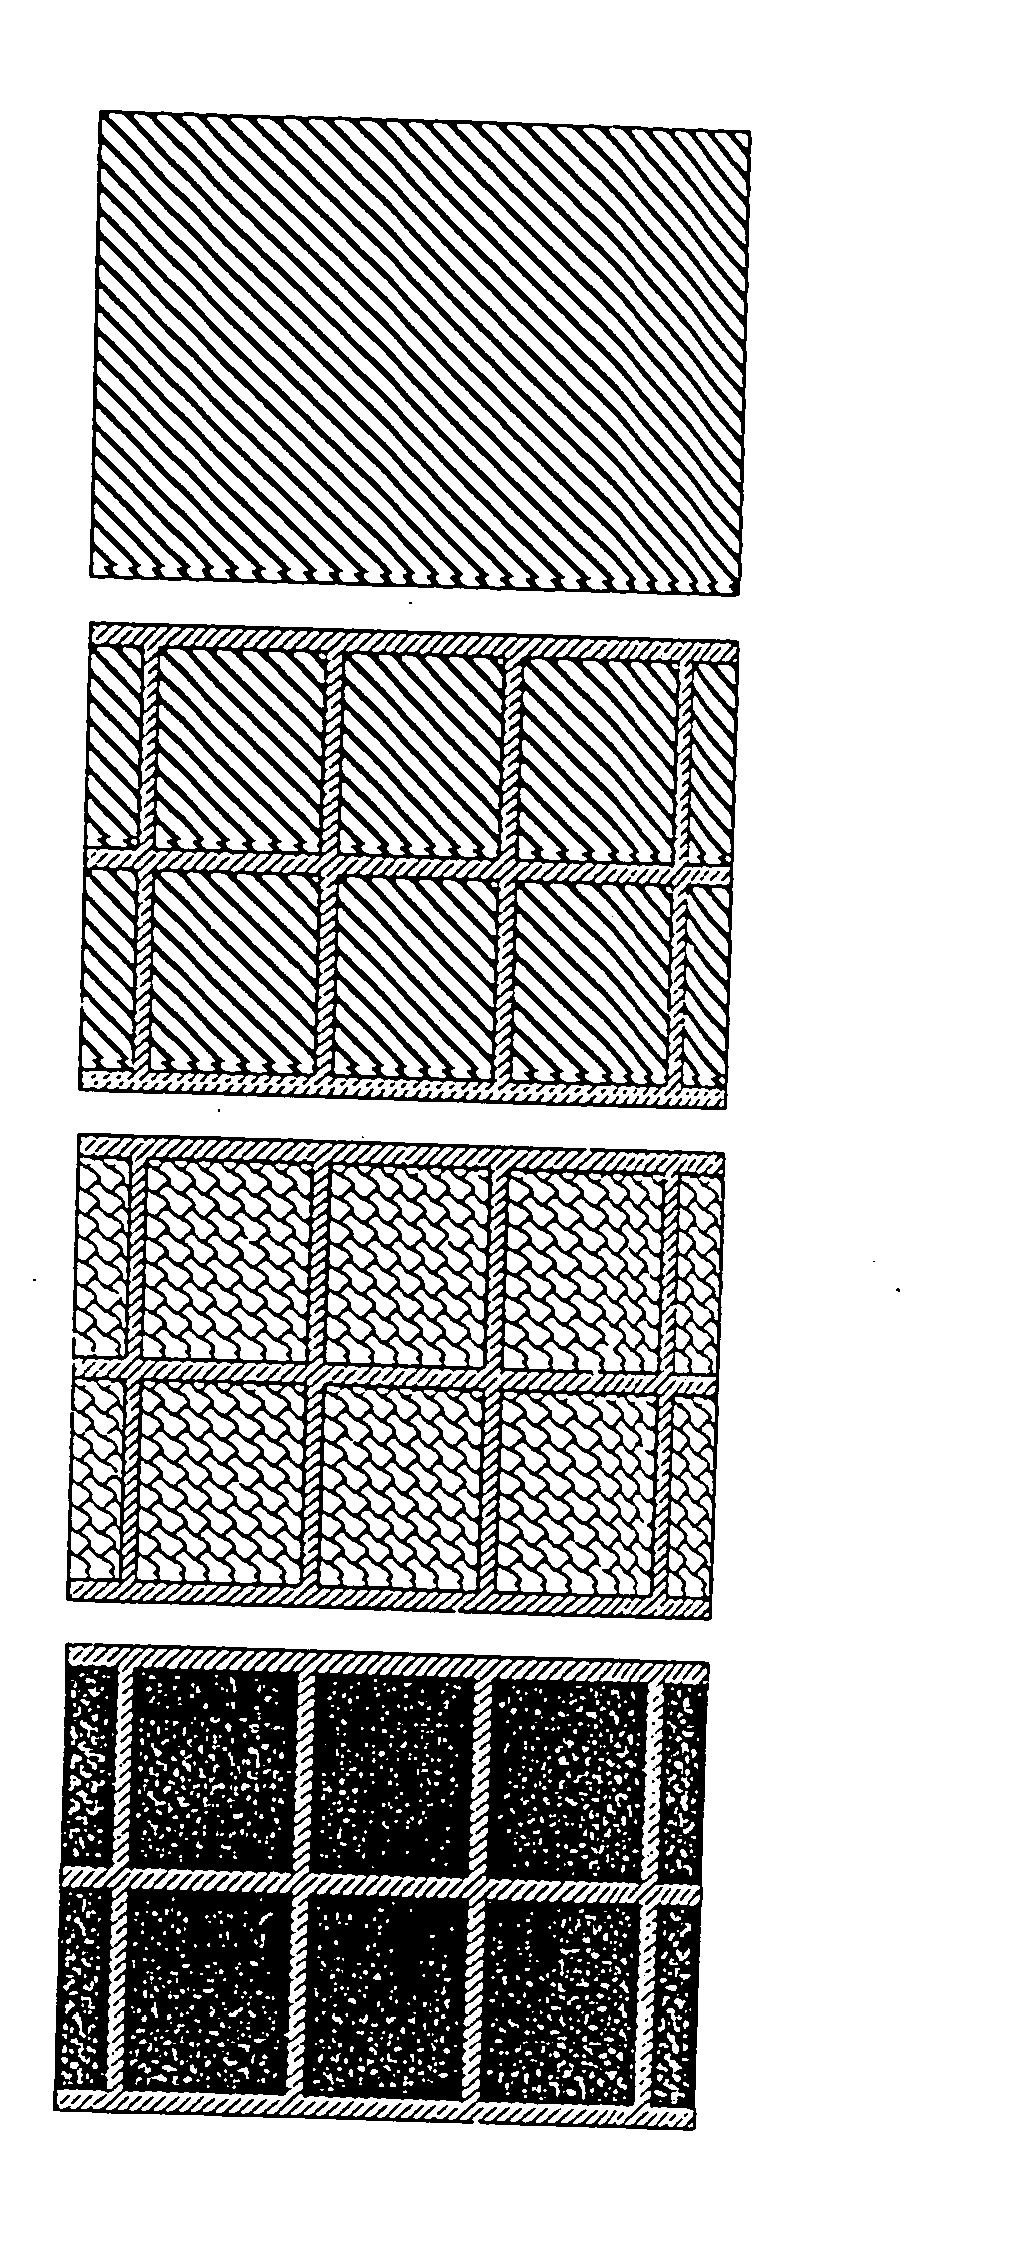 Electrochemical cell structure and method of fabrication